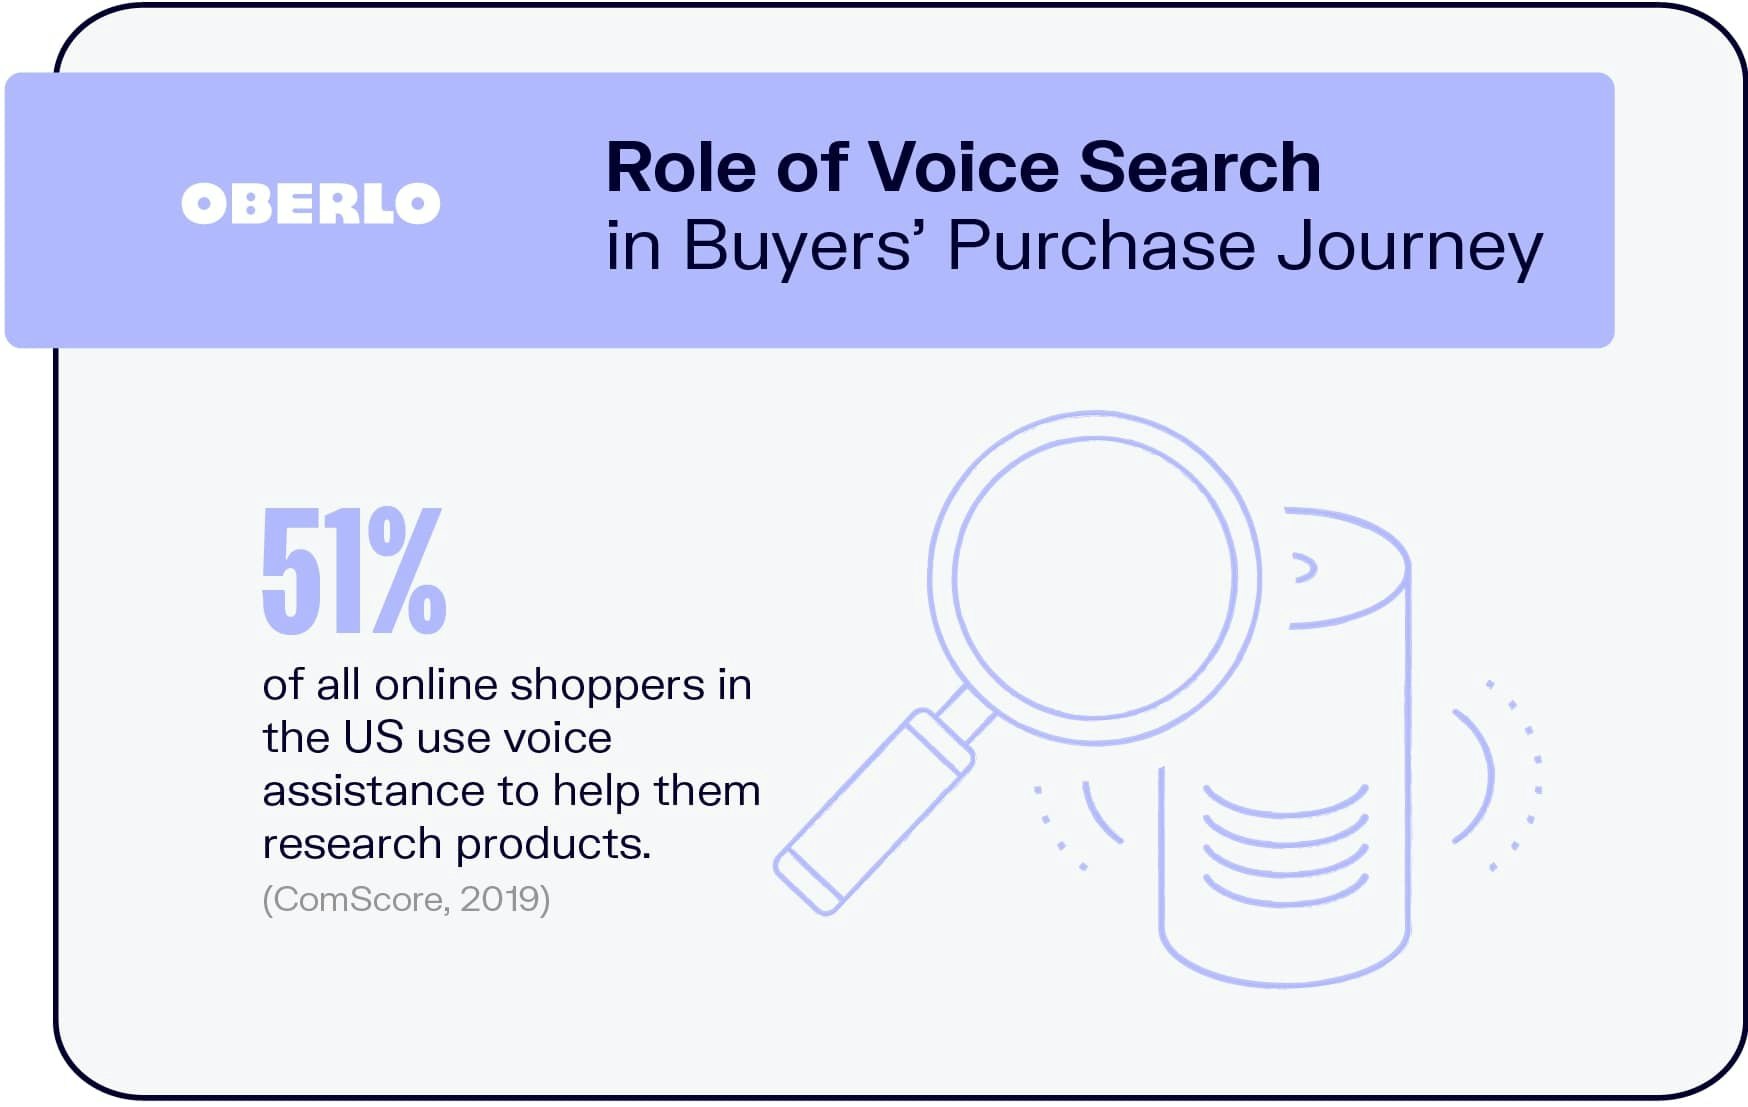 Role of Voice Search in Buyers’ Purchase Journey